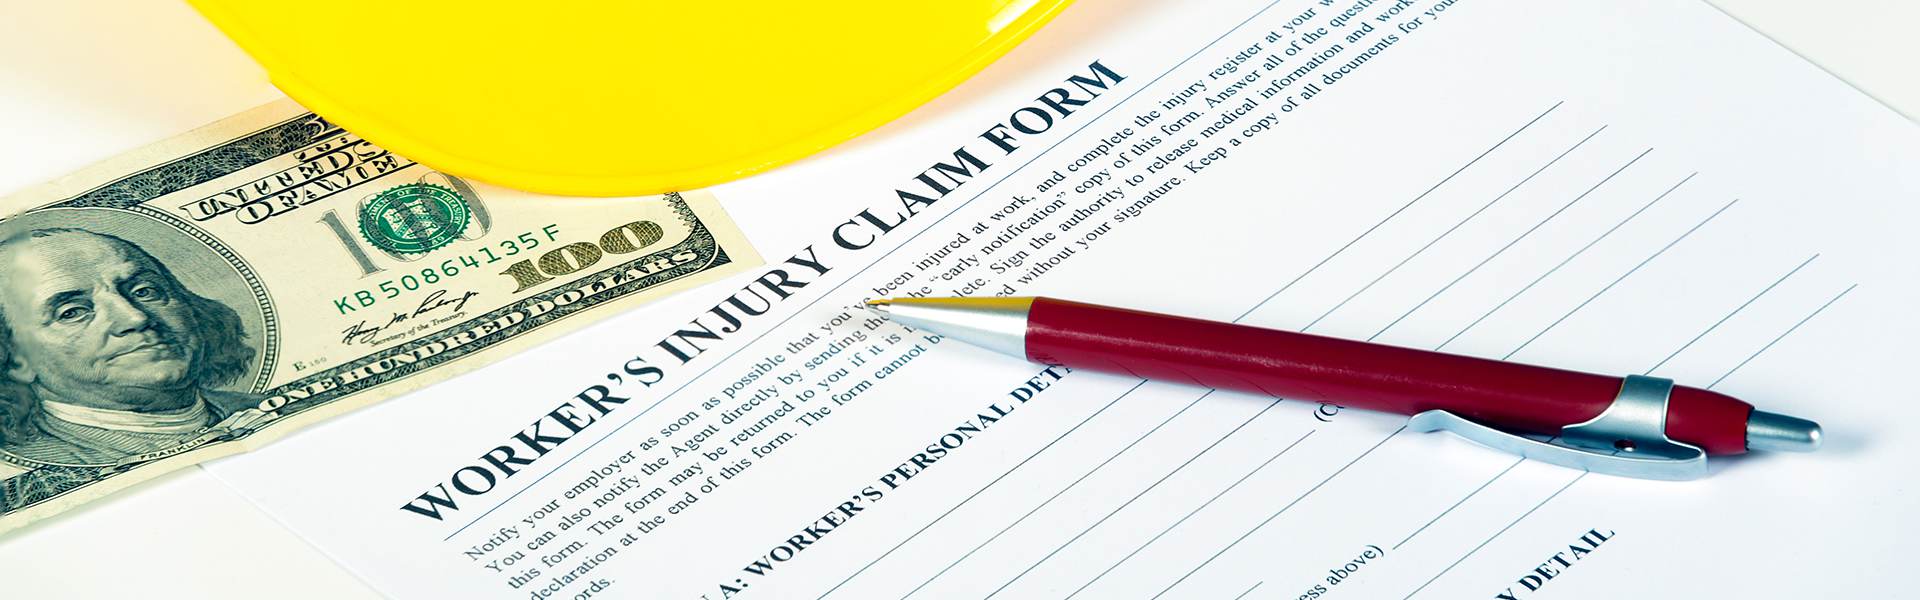 How To File a Workers’ Compensation Claim